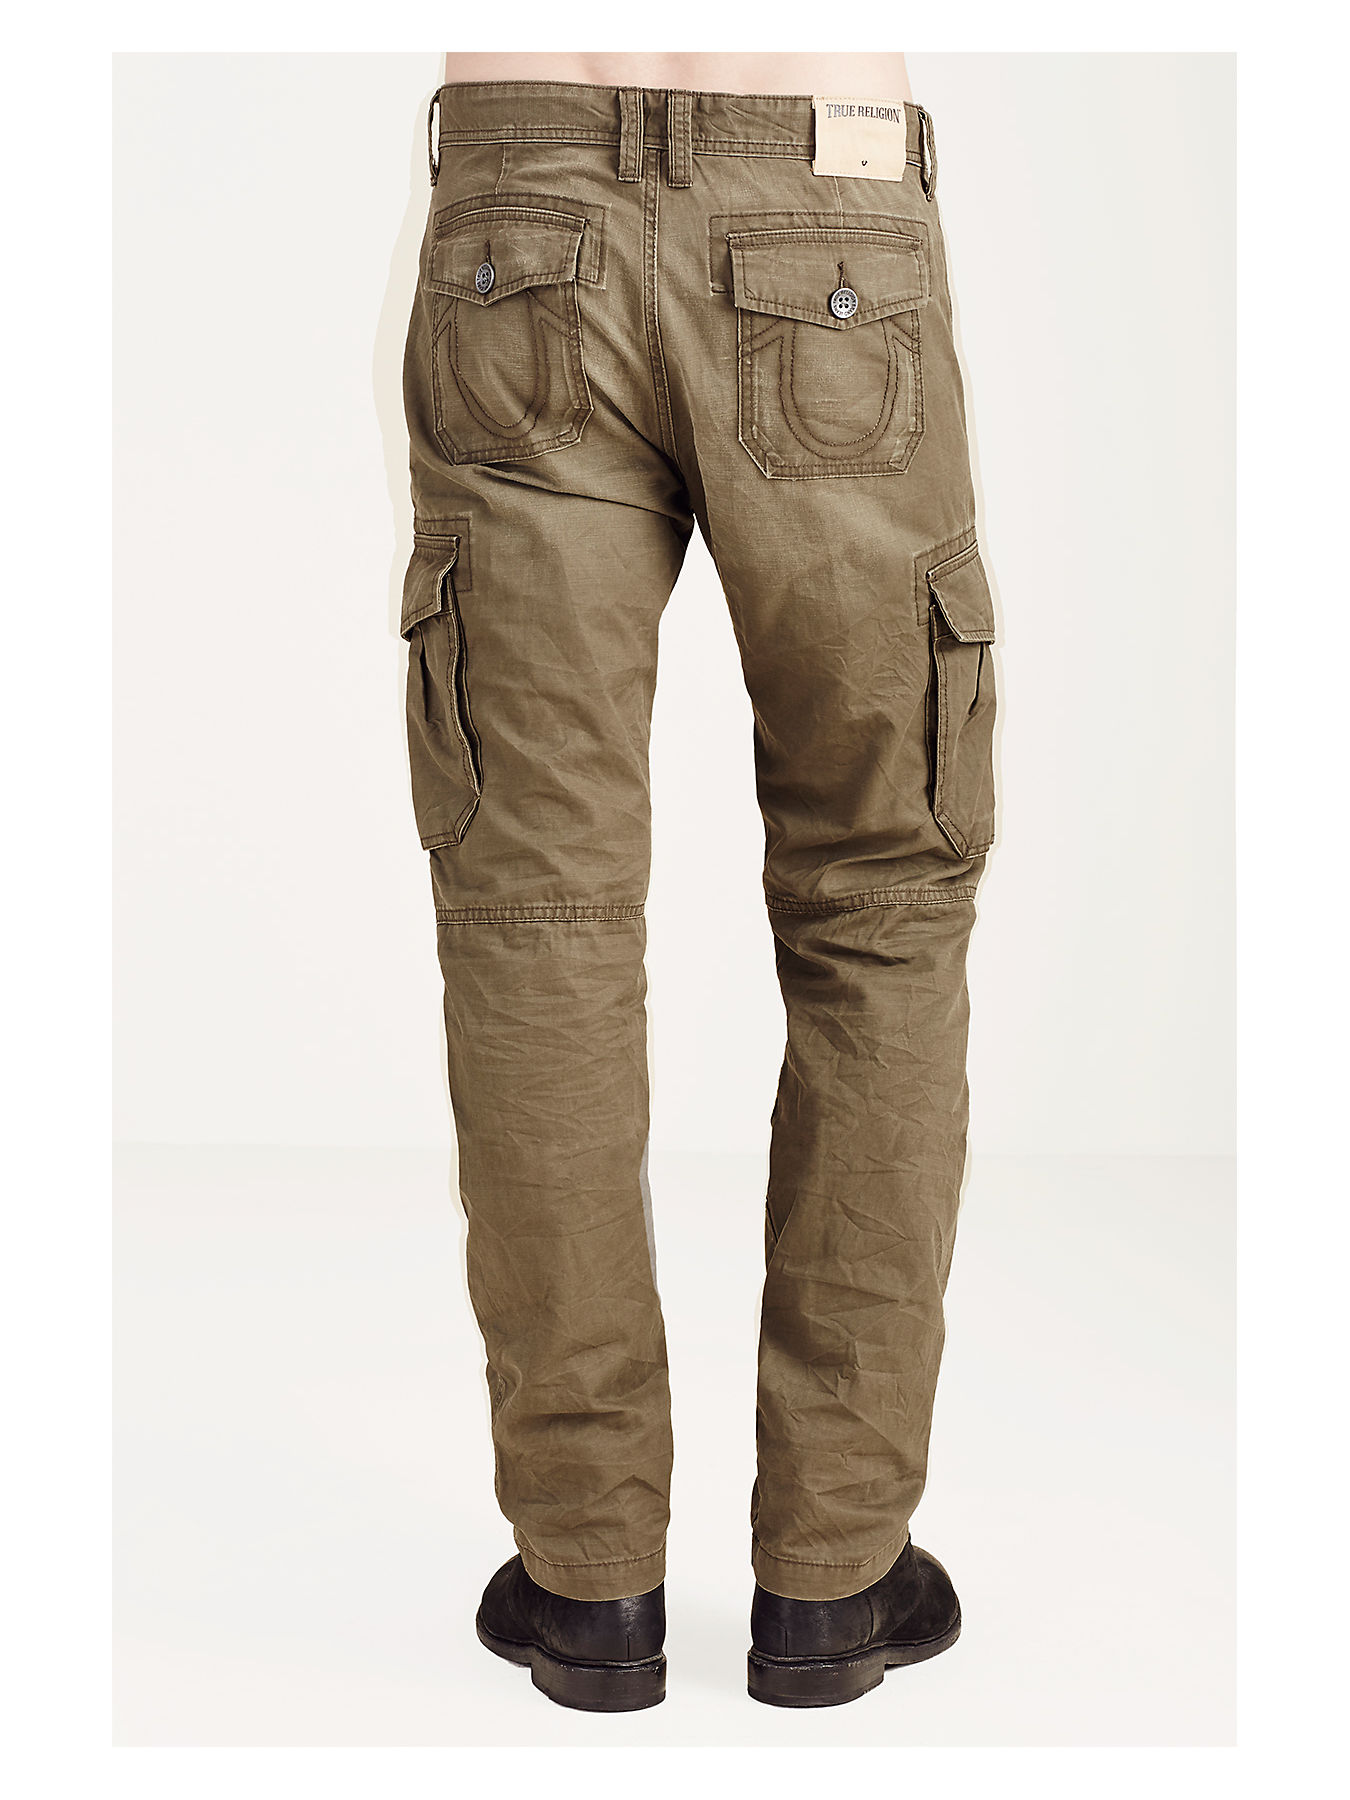 Camouflage Pants For Men – Telegraph